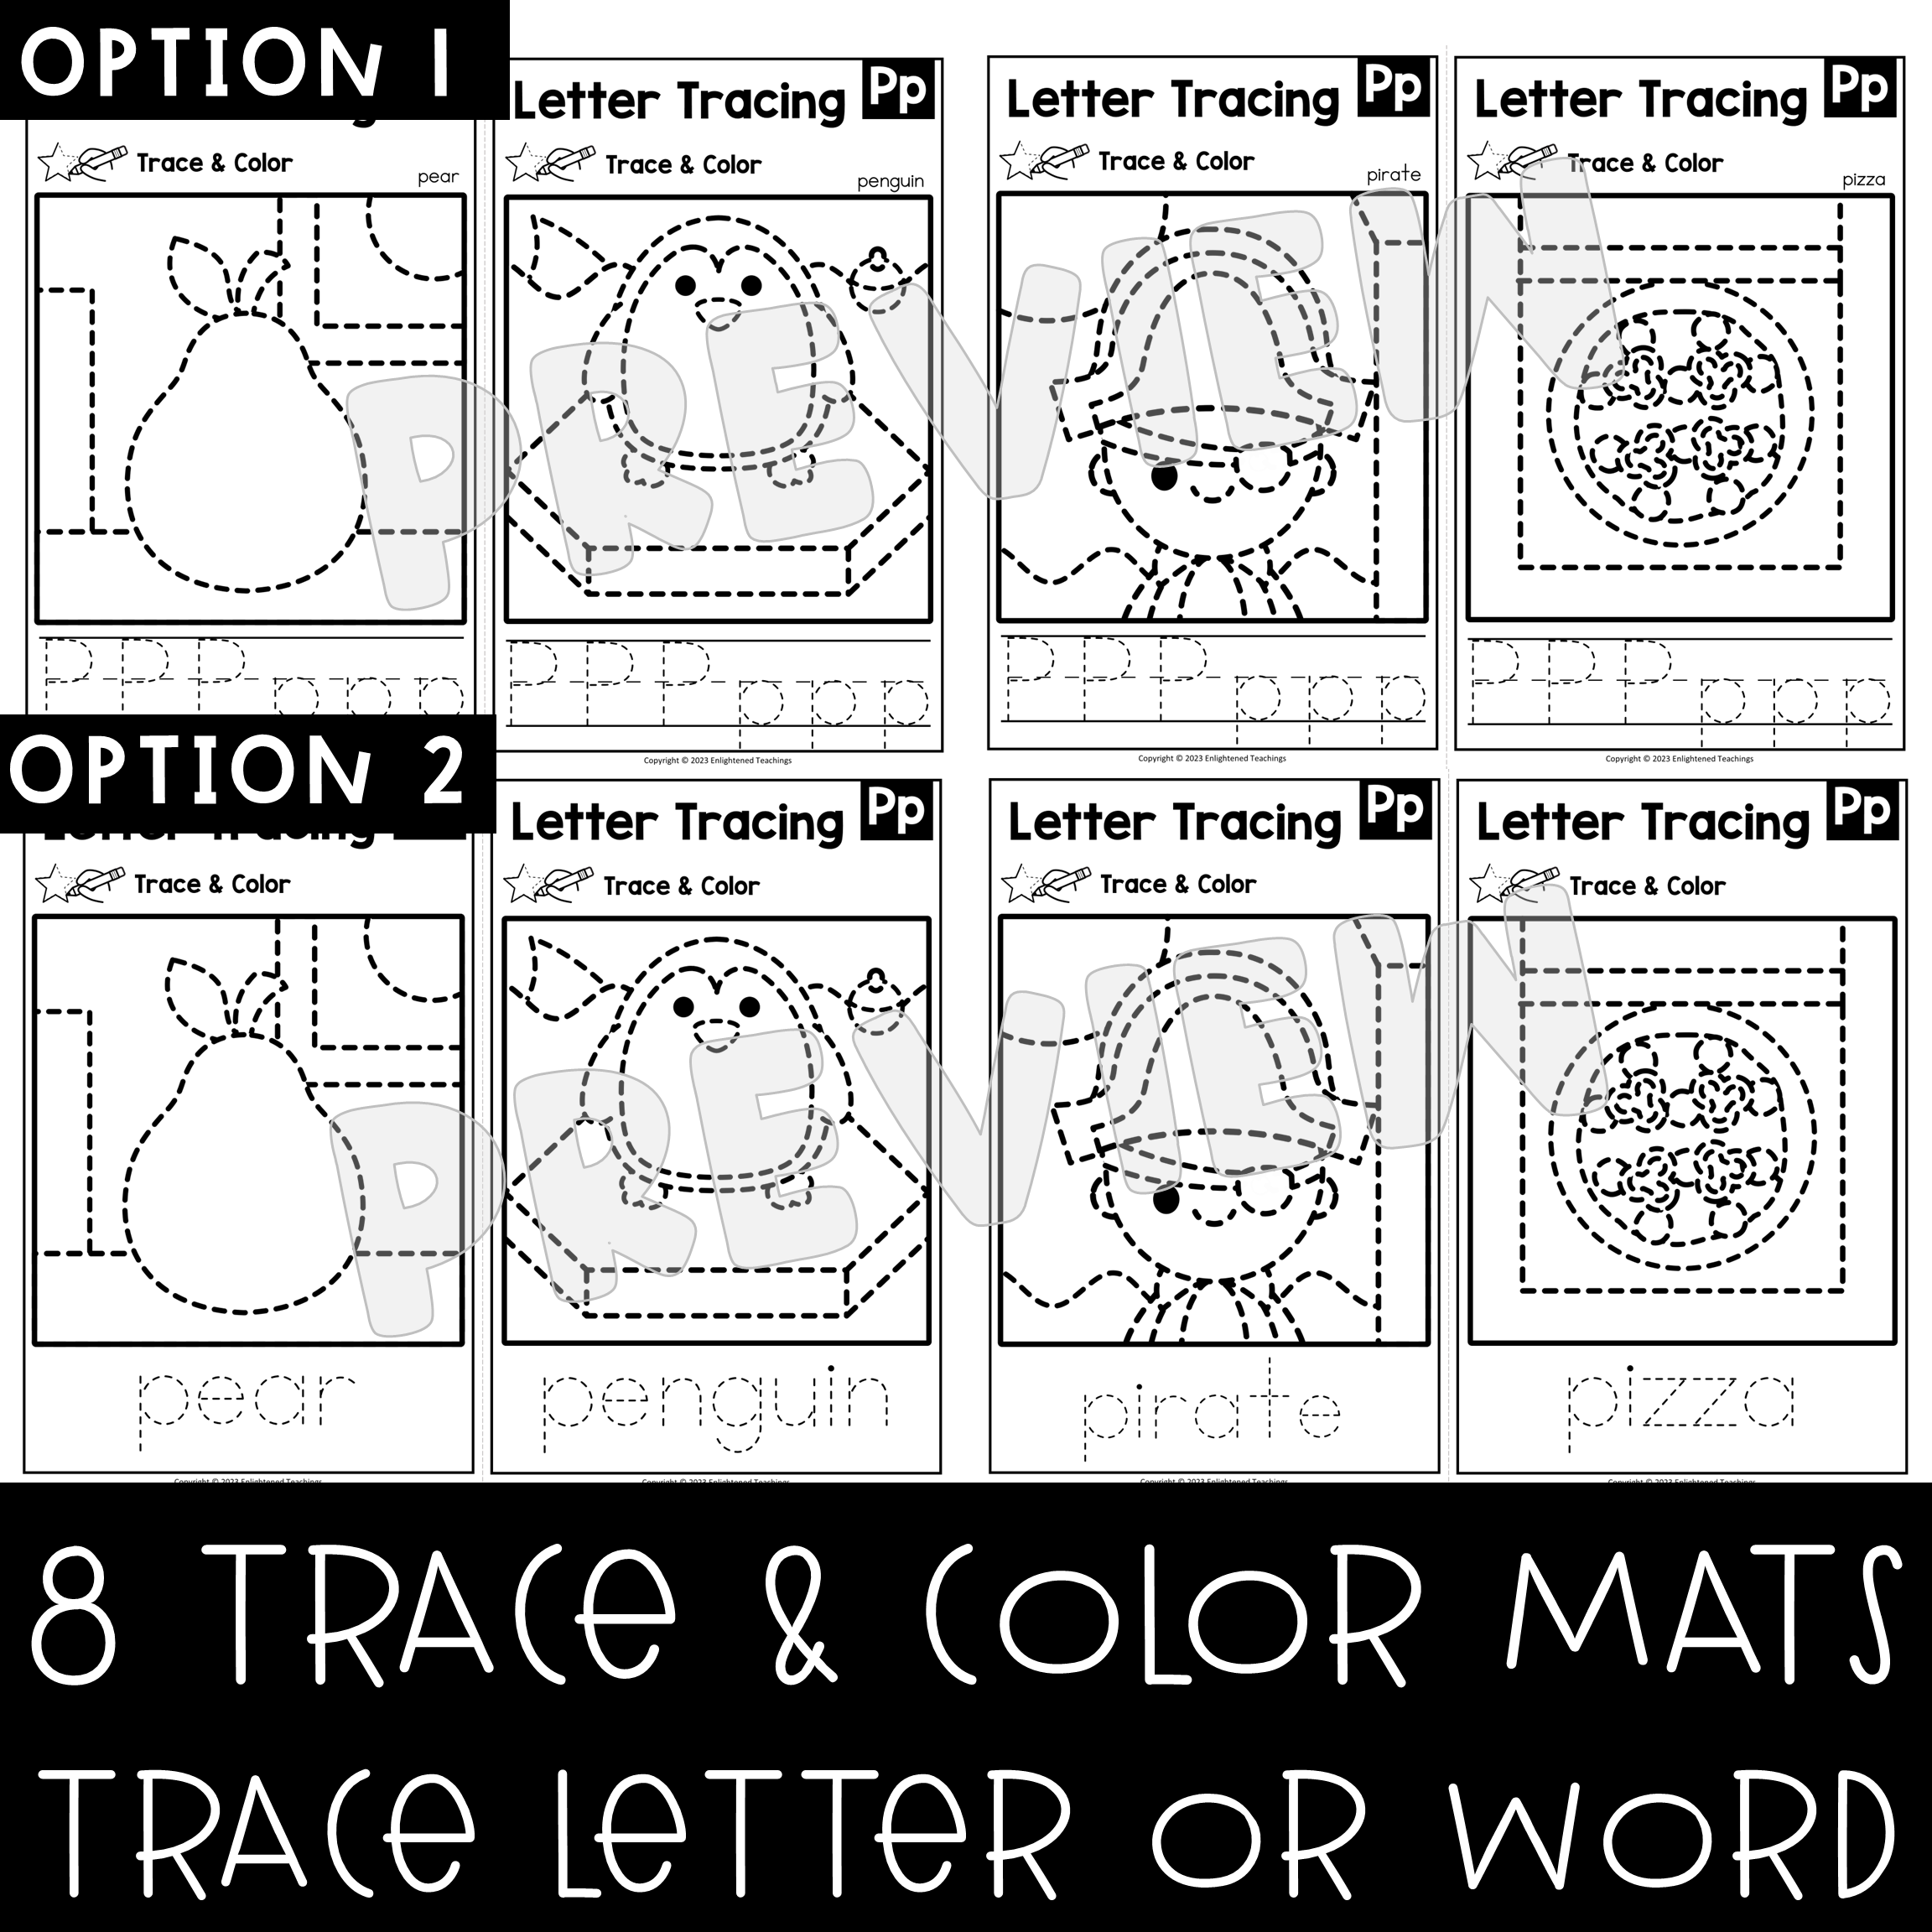 Letter p tracing worksheets letter tracing mats letter p trace color made by teachers